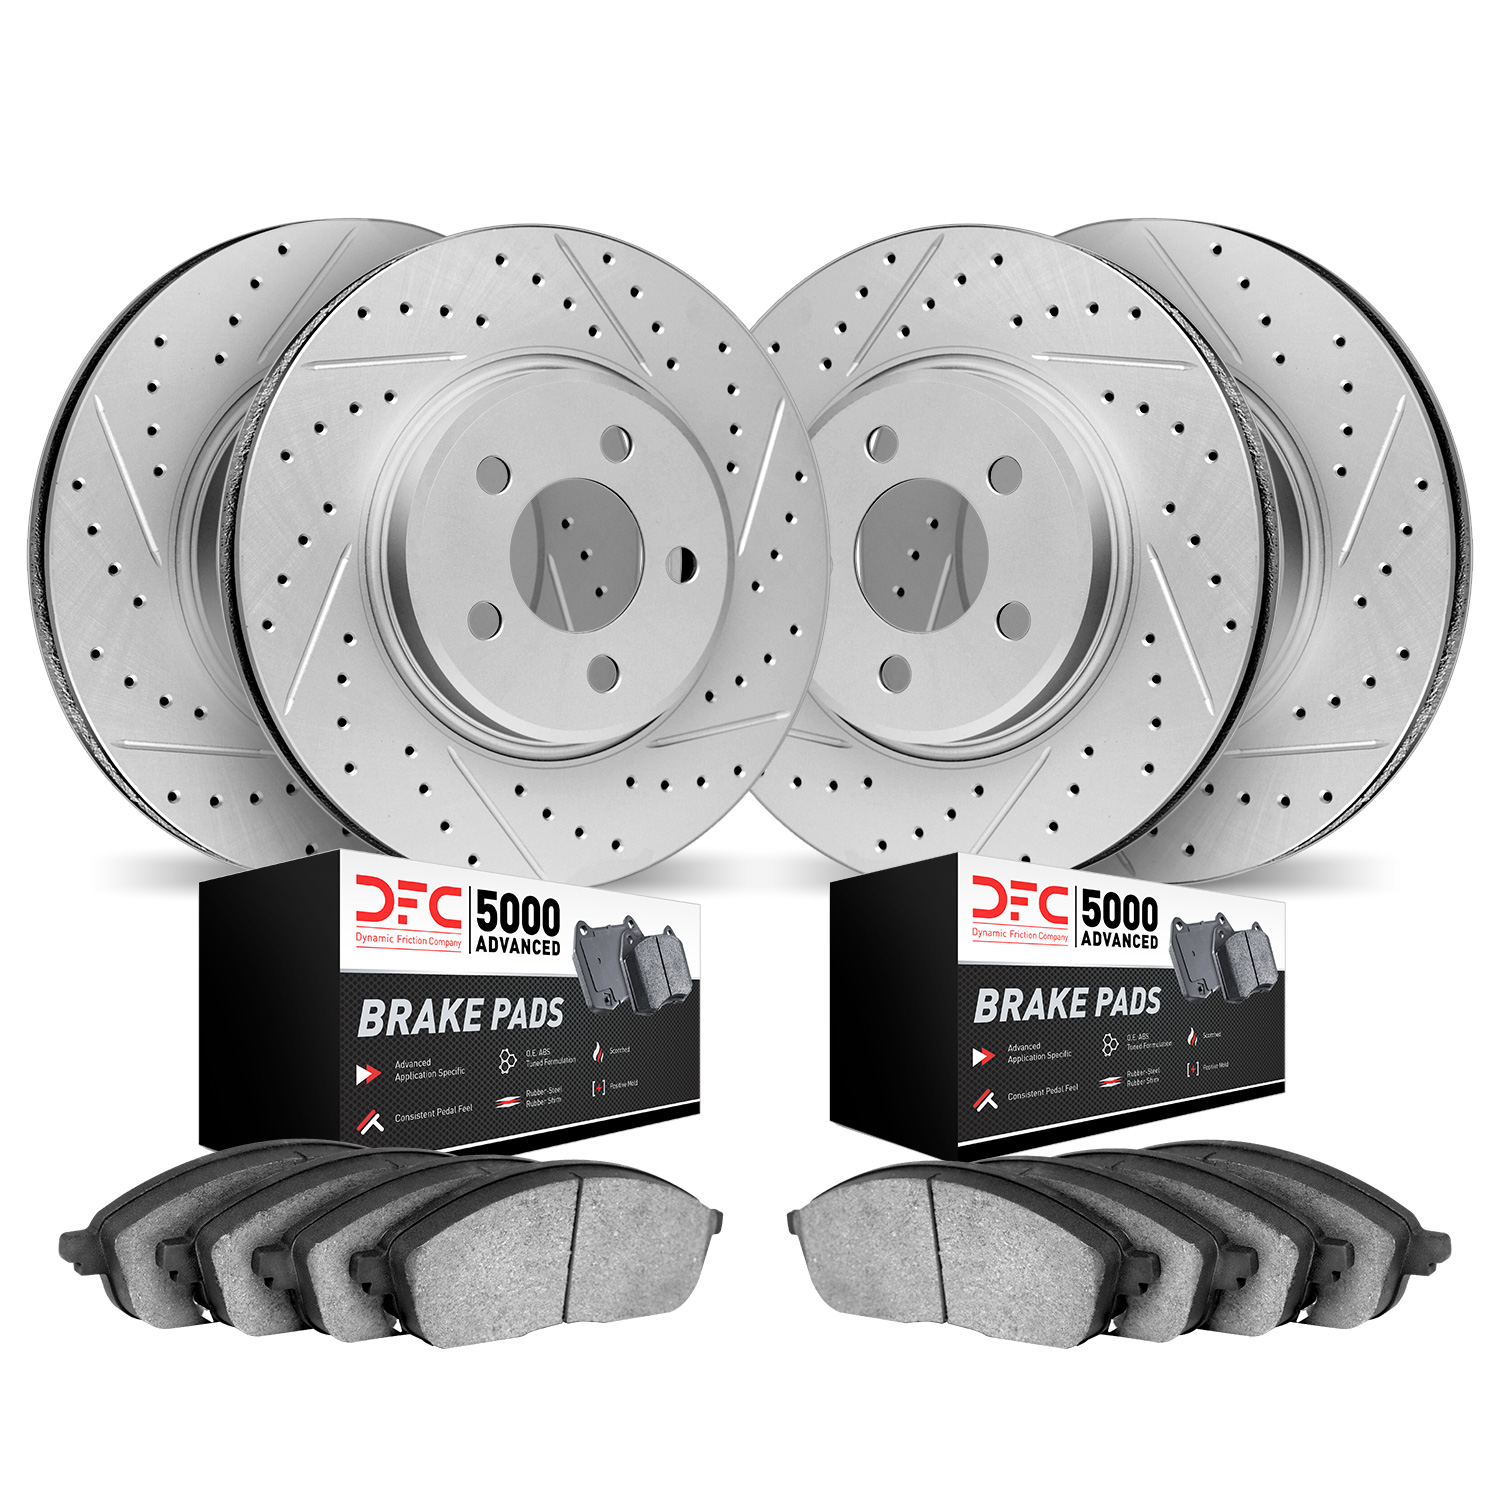 2504-31032 Geoperformance Drilled/Slotted Rotors w/5000 Advanced Brake Pads Kit, 2010-2017 BMW, Position: Front and Rear